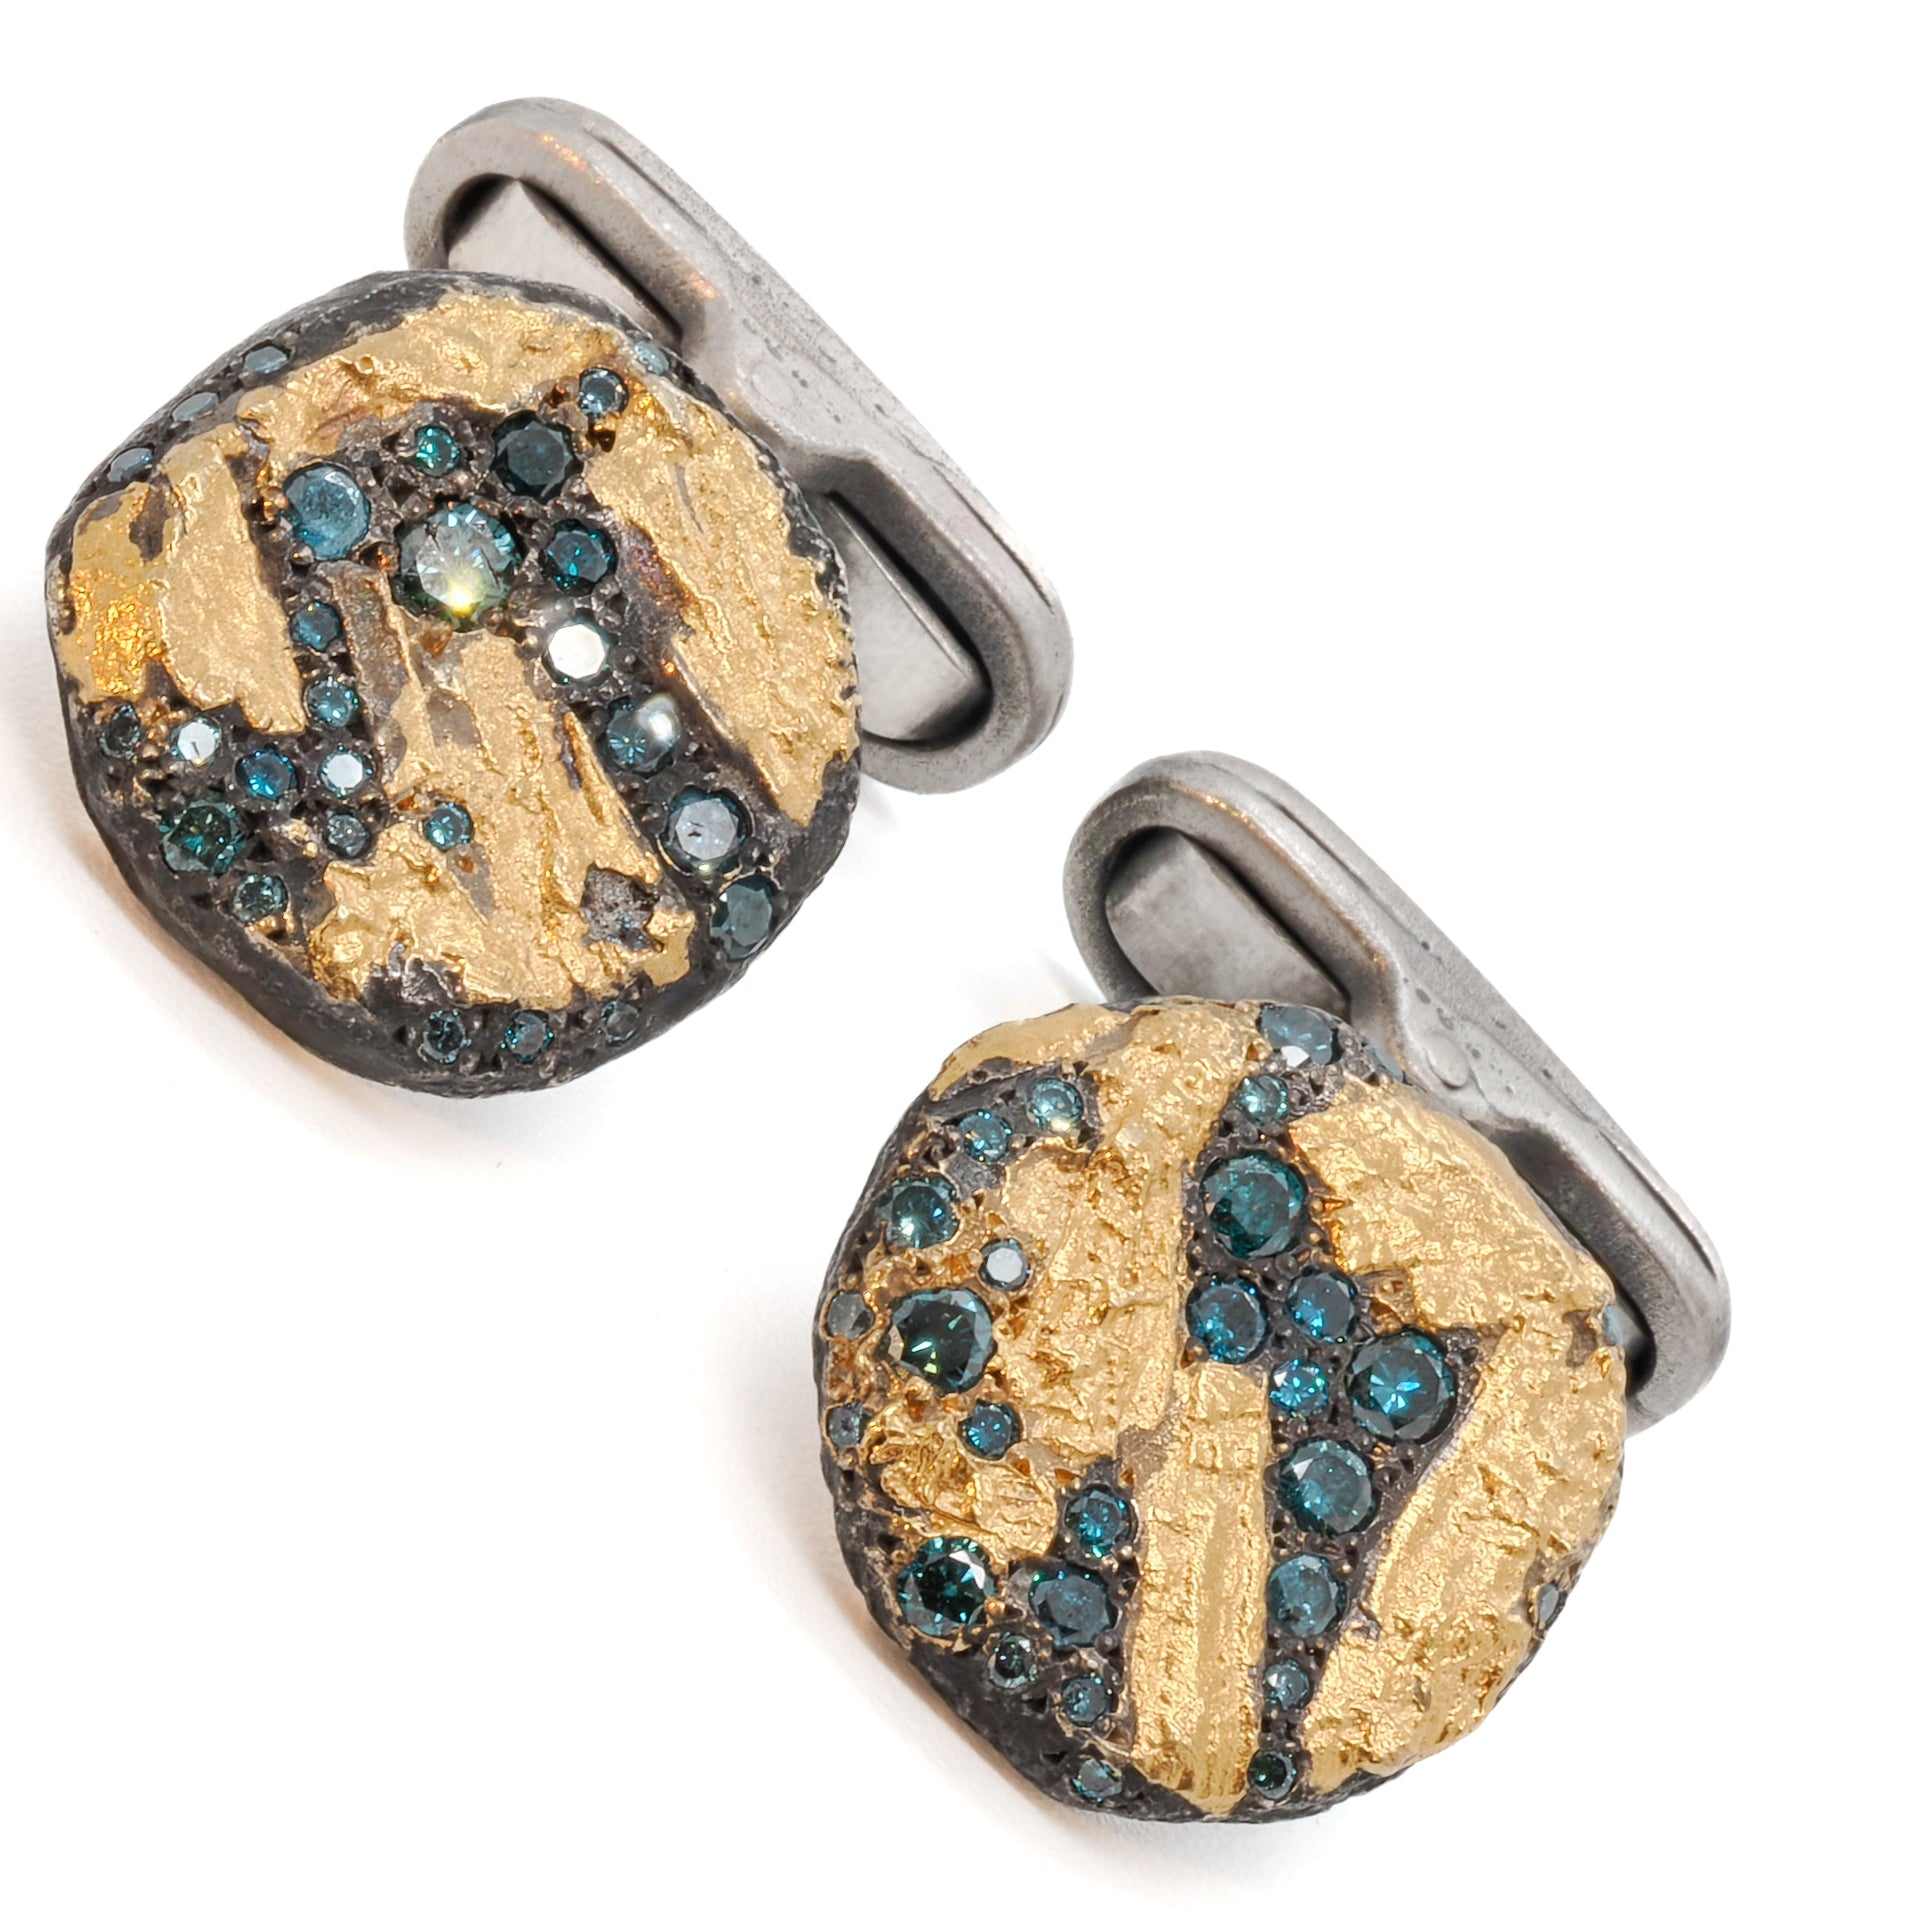 Nature Cufflinks, a pair of handmade jewelry crafted from recycled materials, combining elegance with sustainable practices.